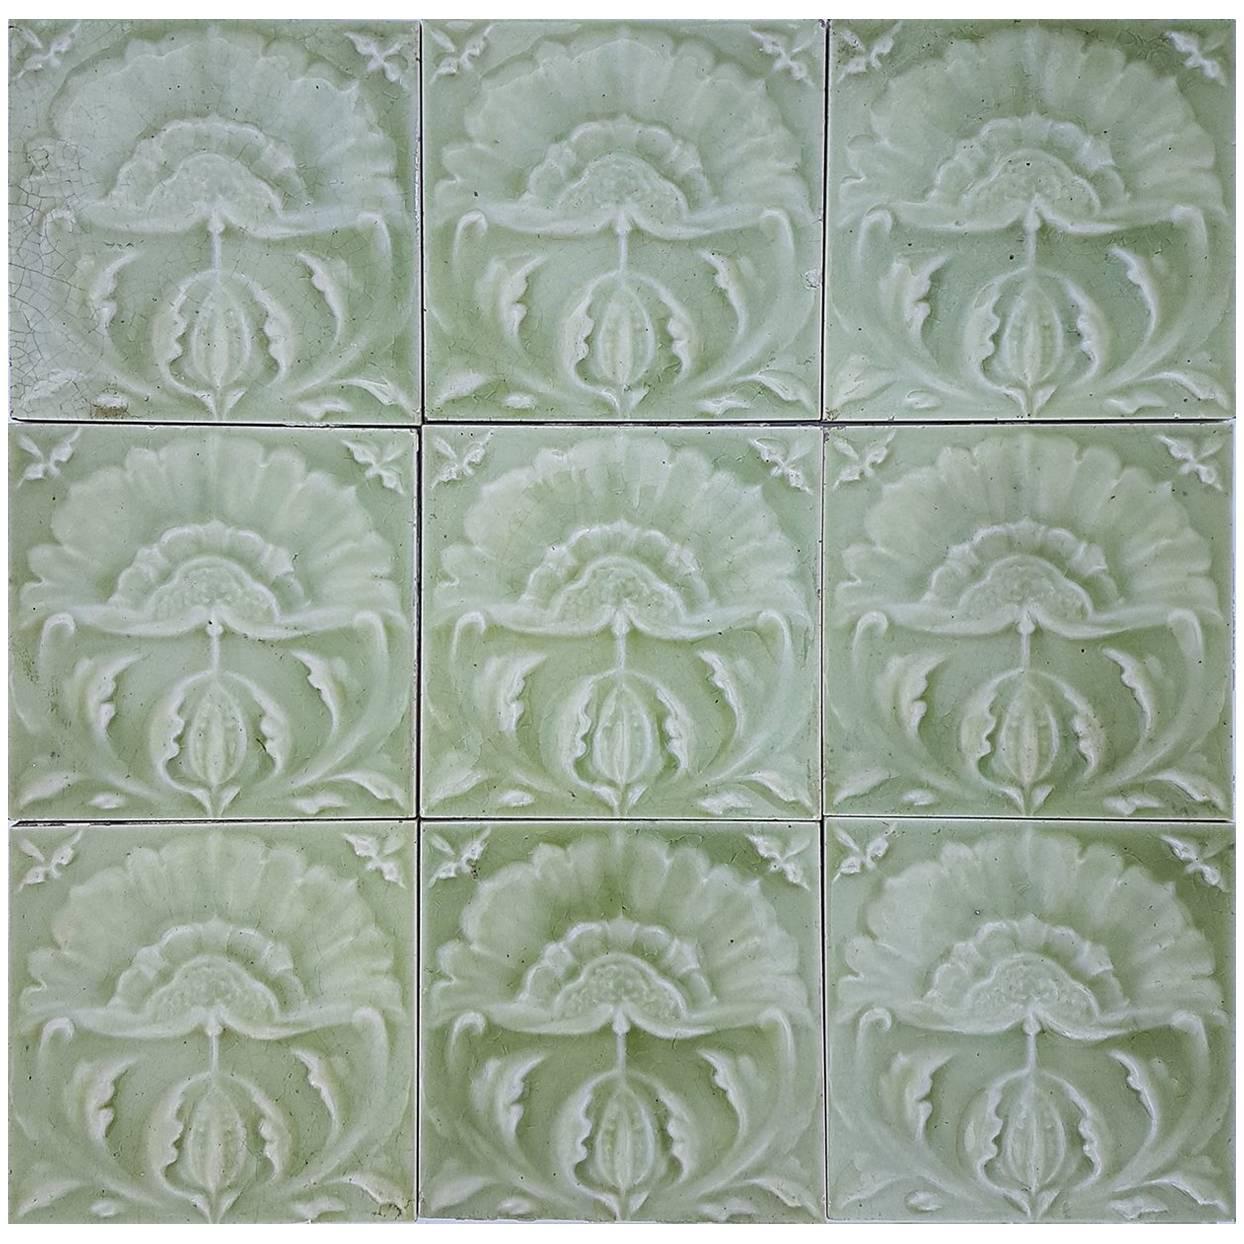 English 1 of the 20 Art Nouveau Relief Tiles by Craven Dunnill, & Co., 1905